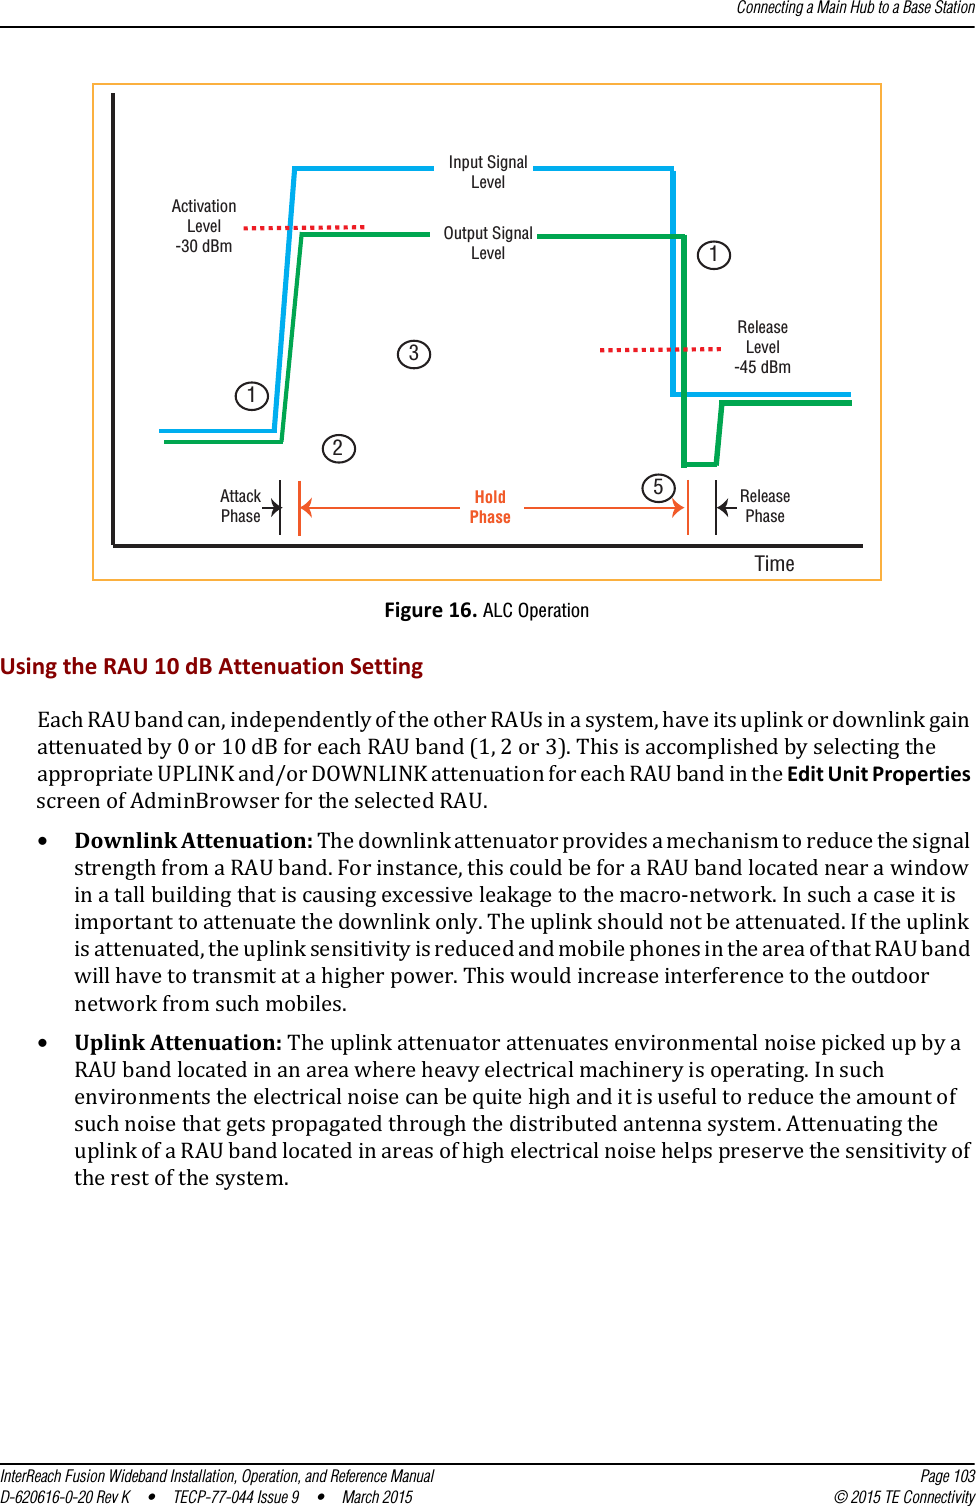 Connecting a Main Hub to a Base StationInterReach Fusion Wideband Installation, Operation, and Reference Manual Page 103D-620616-0-20 Rev K  •  TECP-77-044 Issue 9  •  March 2015 © 2015 TE ConnectivityFigure 16. ALC OperationUsing the RAU 10 dB Attenuation SettingEach RAU band can, independently of the other RAUs in a system, have its uplink or downlink gain attenuated by 0 or 10 dB for each RAU band (1, 2 or 3). This is accomplished by selecting the appropriate UPLINK and/or DOWNLINK attenuation for each RAU band in the Edit Unit Properties screen of AdminBrowser for the selected RAU.•Downlink Attenuation: The downlink attenuator provides a mechanism to reduce the signal strength from a RAU band. For instance, this could be for a RAU band located near a window in a tall building that is causing excessive leakage to the macro-network. In such a case it is important to attenuate the downlink only. The uplink should not be attenuated. If the uplink is attenuated, the uplink sensitivity is reduced and mobile phones in the area of that RAU band will have to transmit at a higher power. This would increase interference to the outdoor network from such mobiles.•Uplink Attenuation: The uplink attenuator attenuates environmental noise picked up by a RAU band located in an area where heavy electrical machinery is operating. In such environments the electrical noise can be quite high and it is useful to reduce the amount of such noise that gets propagated through the distributed antenna system. Attenuating the uplink of a RAU band located in areas of high electrical noise helps preserve the sensitivity of the rest of the system.AttackPhaseReleasePhaseHoldPhaseOutput SignalLevelActivationLevel-30 dBmInput SignalLevelReleaseLevel-45 dBmTime11523